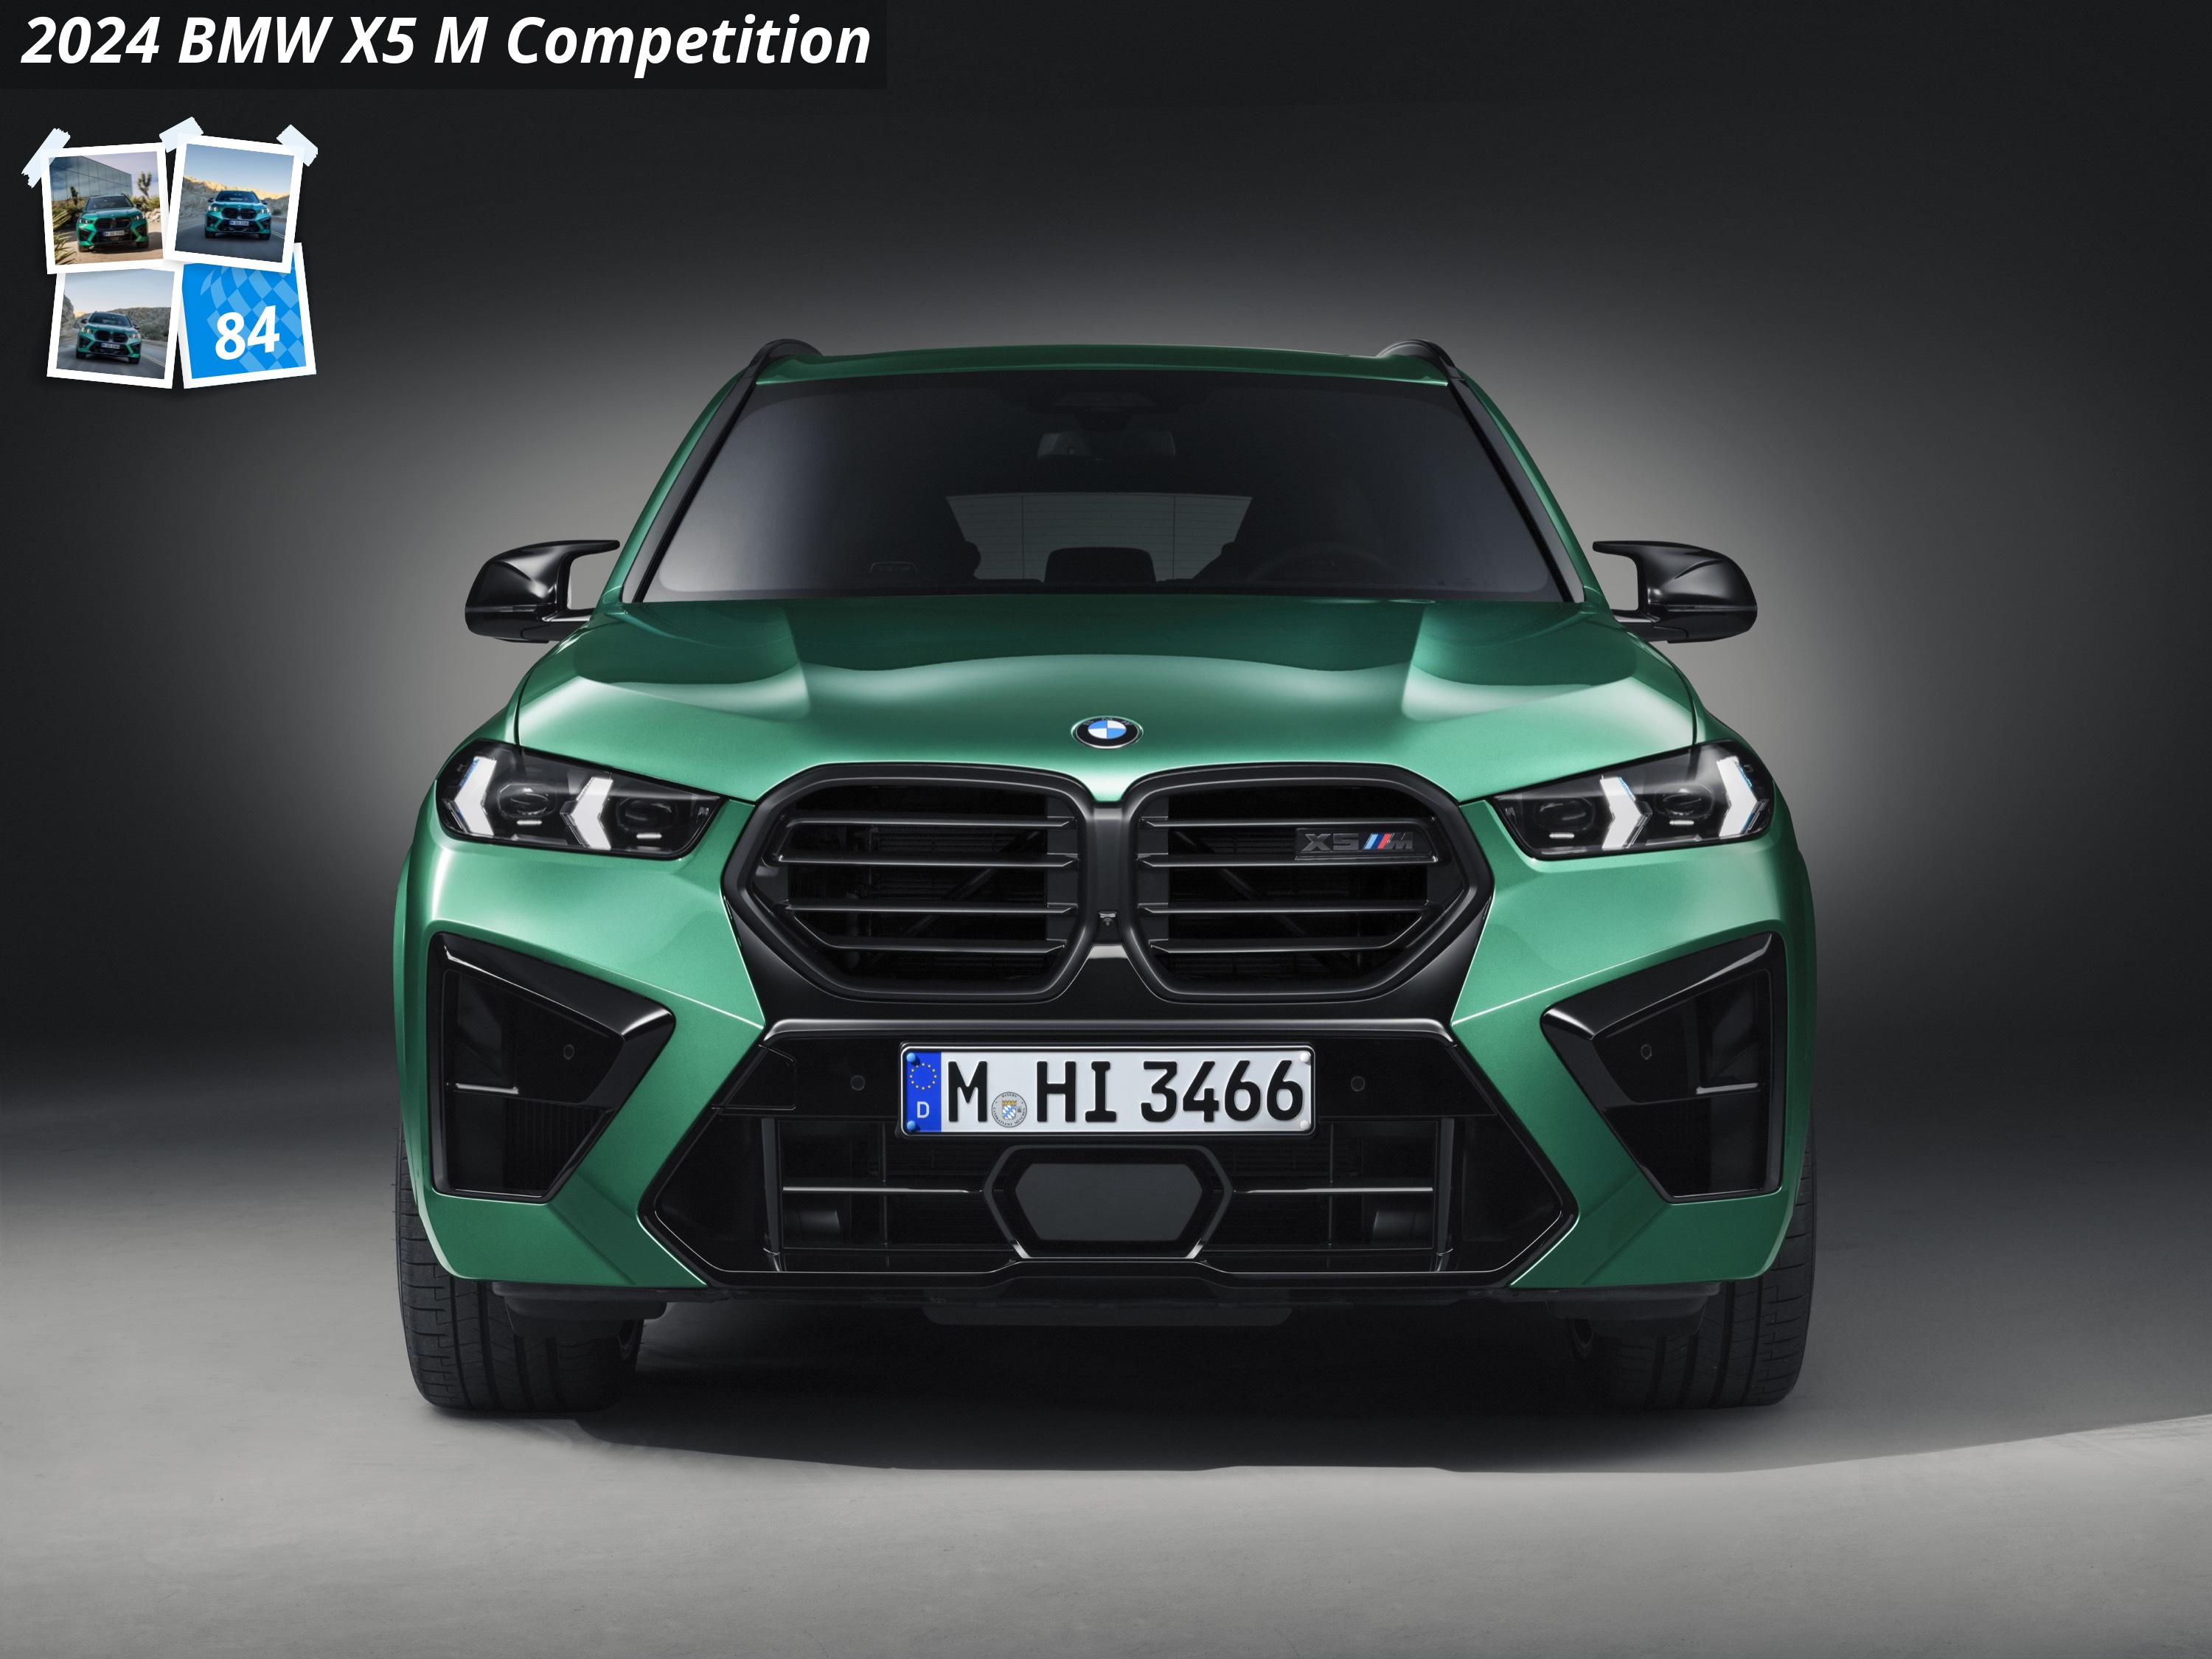 BMW X5 M Competition (2024)